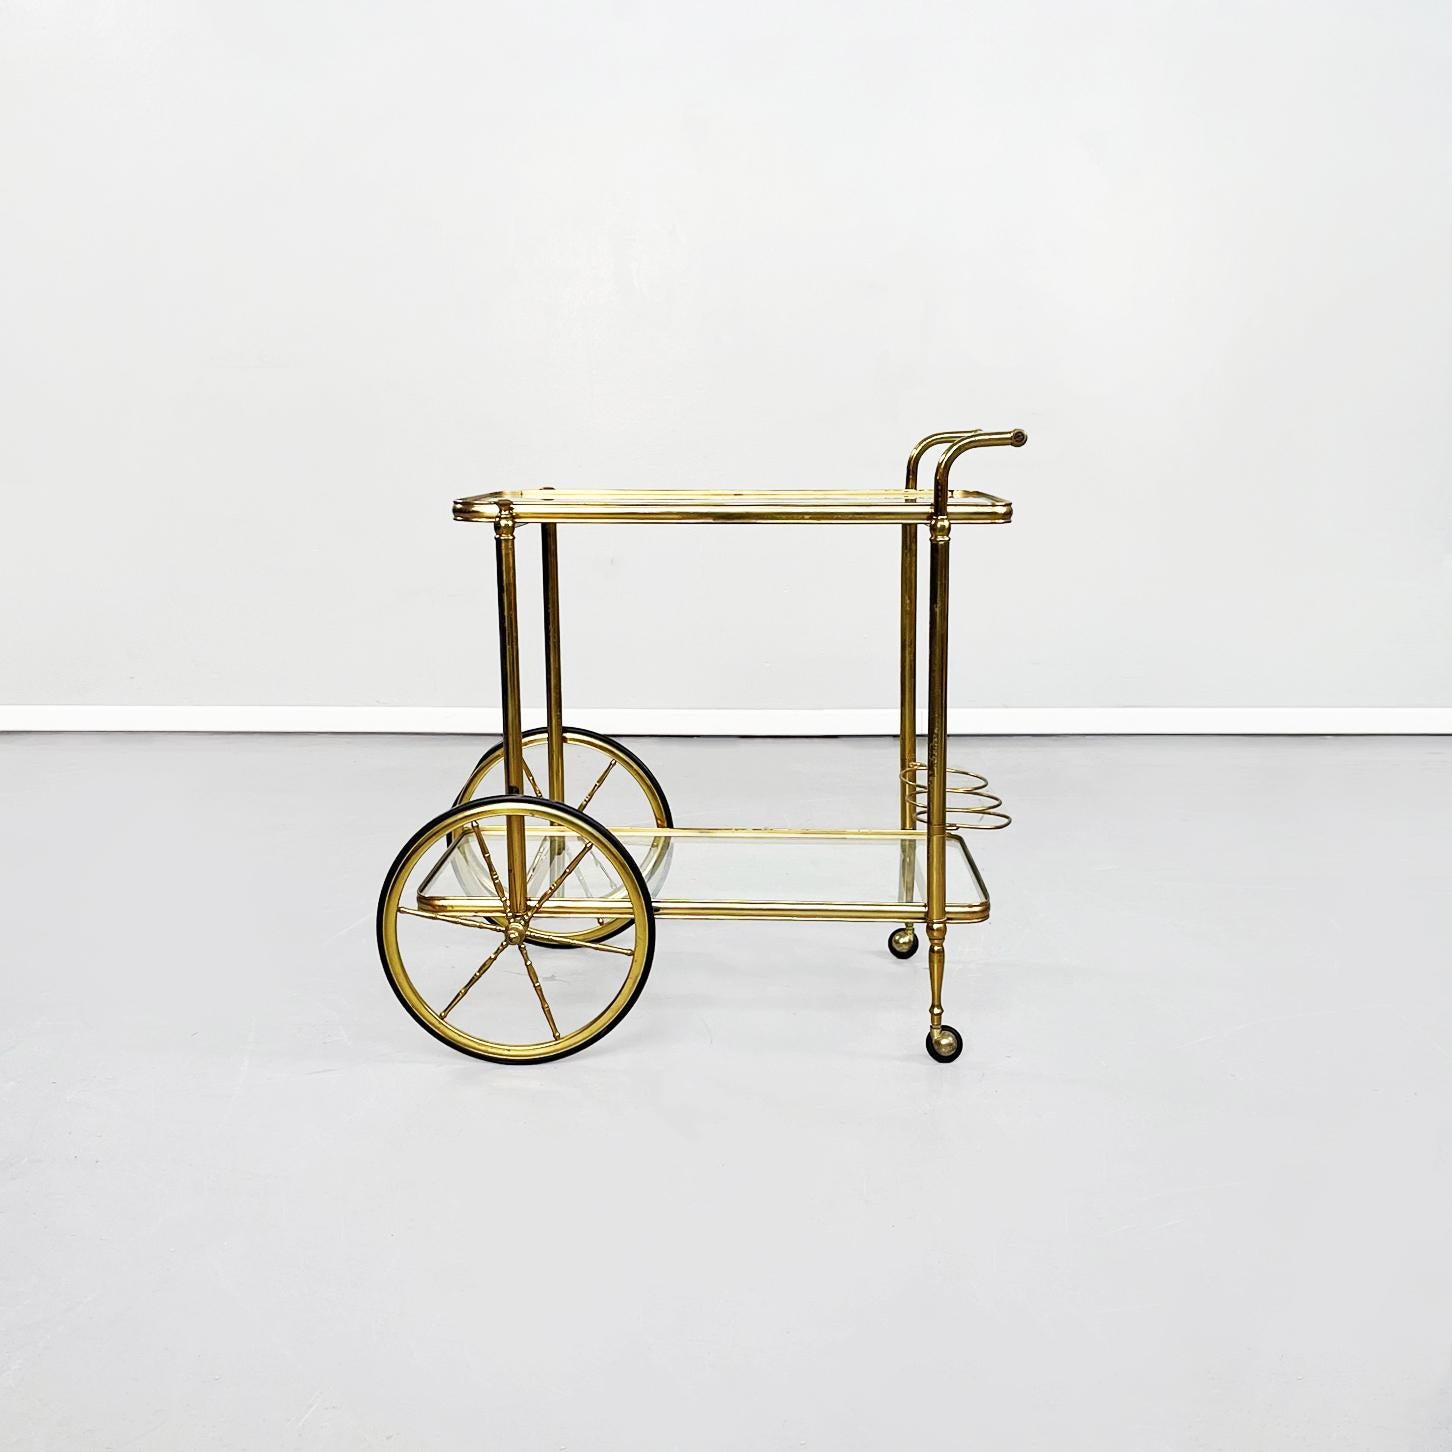 Italian Mid-Century Modern cart in brass and glass, 1950s.
Rectangular food trolley with rounded brass corners. The two floors are made up of two sheets of transparent glass, on the lower one there are three bottle holders. The bar cart has four